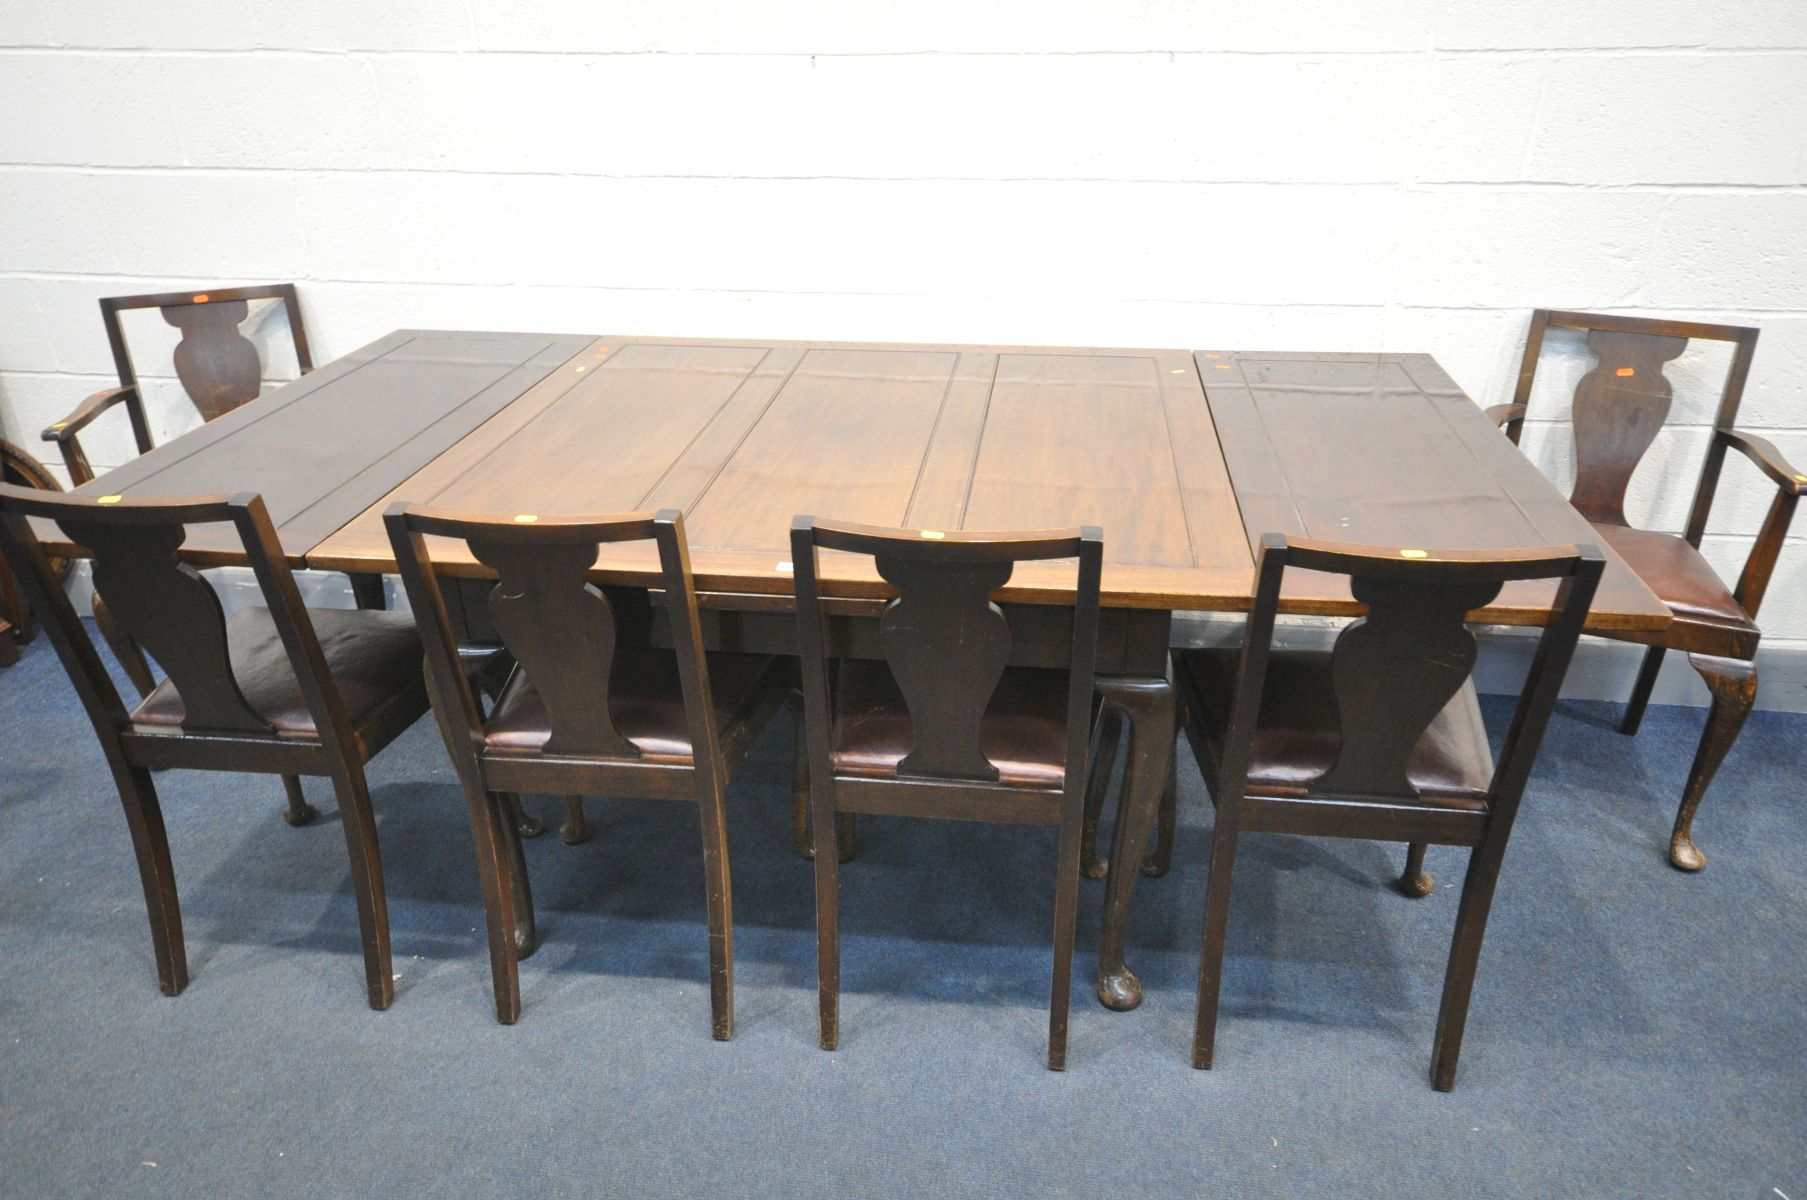 A 20TH CENTURY MAHOGANY DRAW LEAF DINING TABLE, on Queen Anne legs, open length 214cm x closed